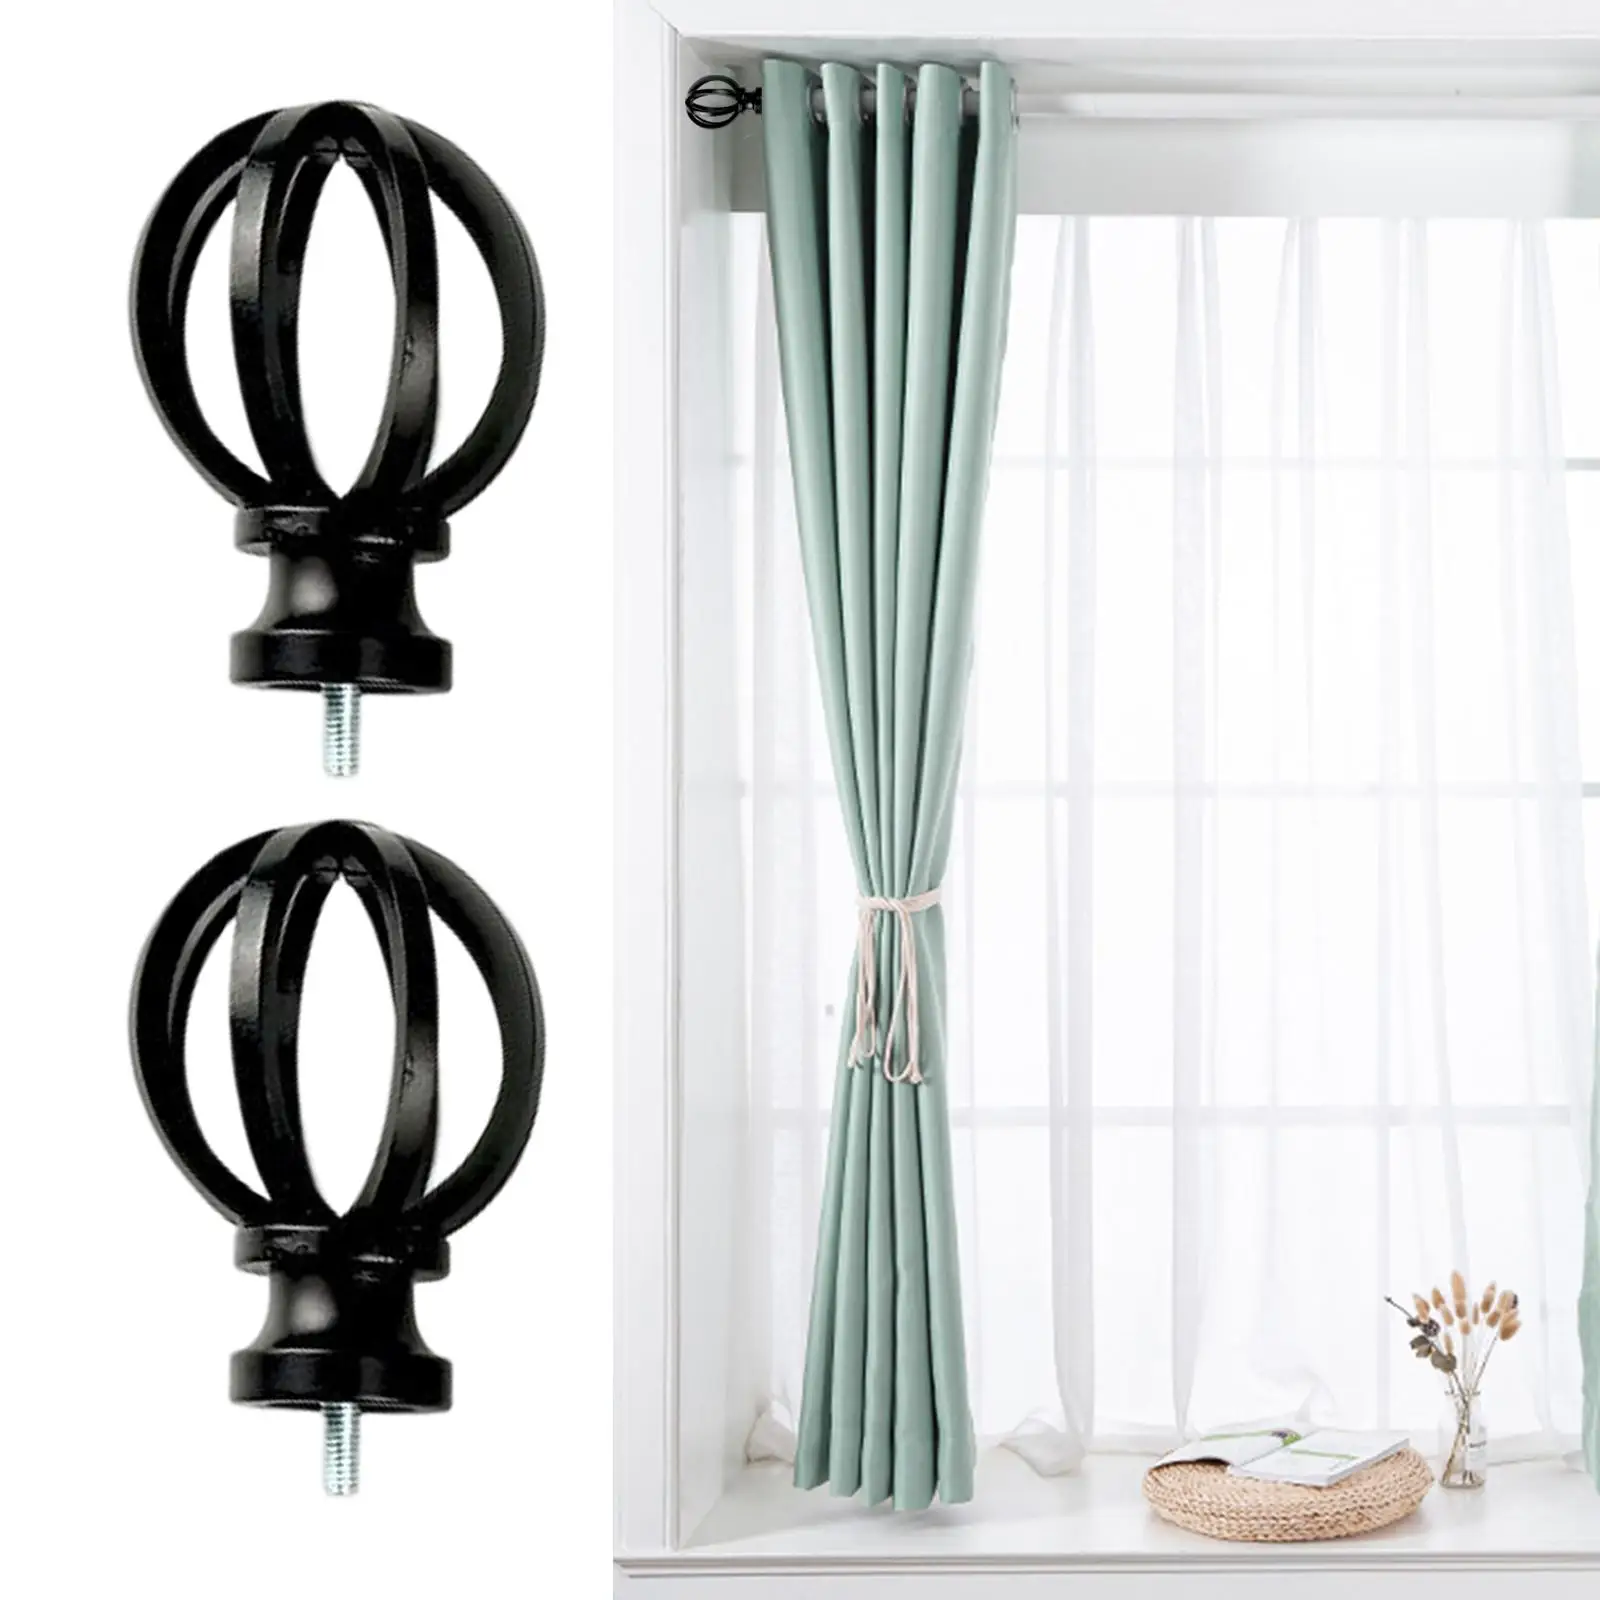 2Pcs Window Curtain Rod Finial Ends 5/8 Inch Diameter Decorative for Bedroom